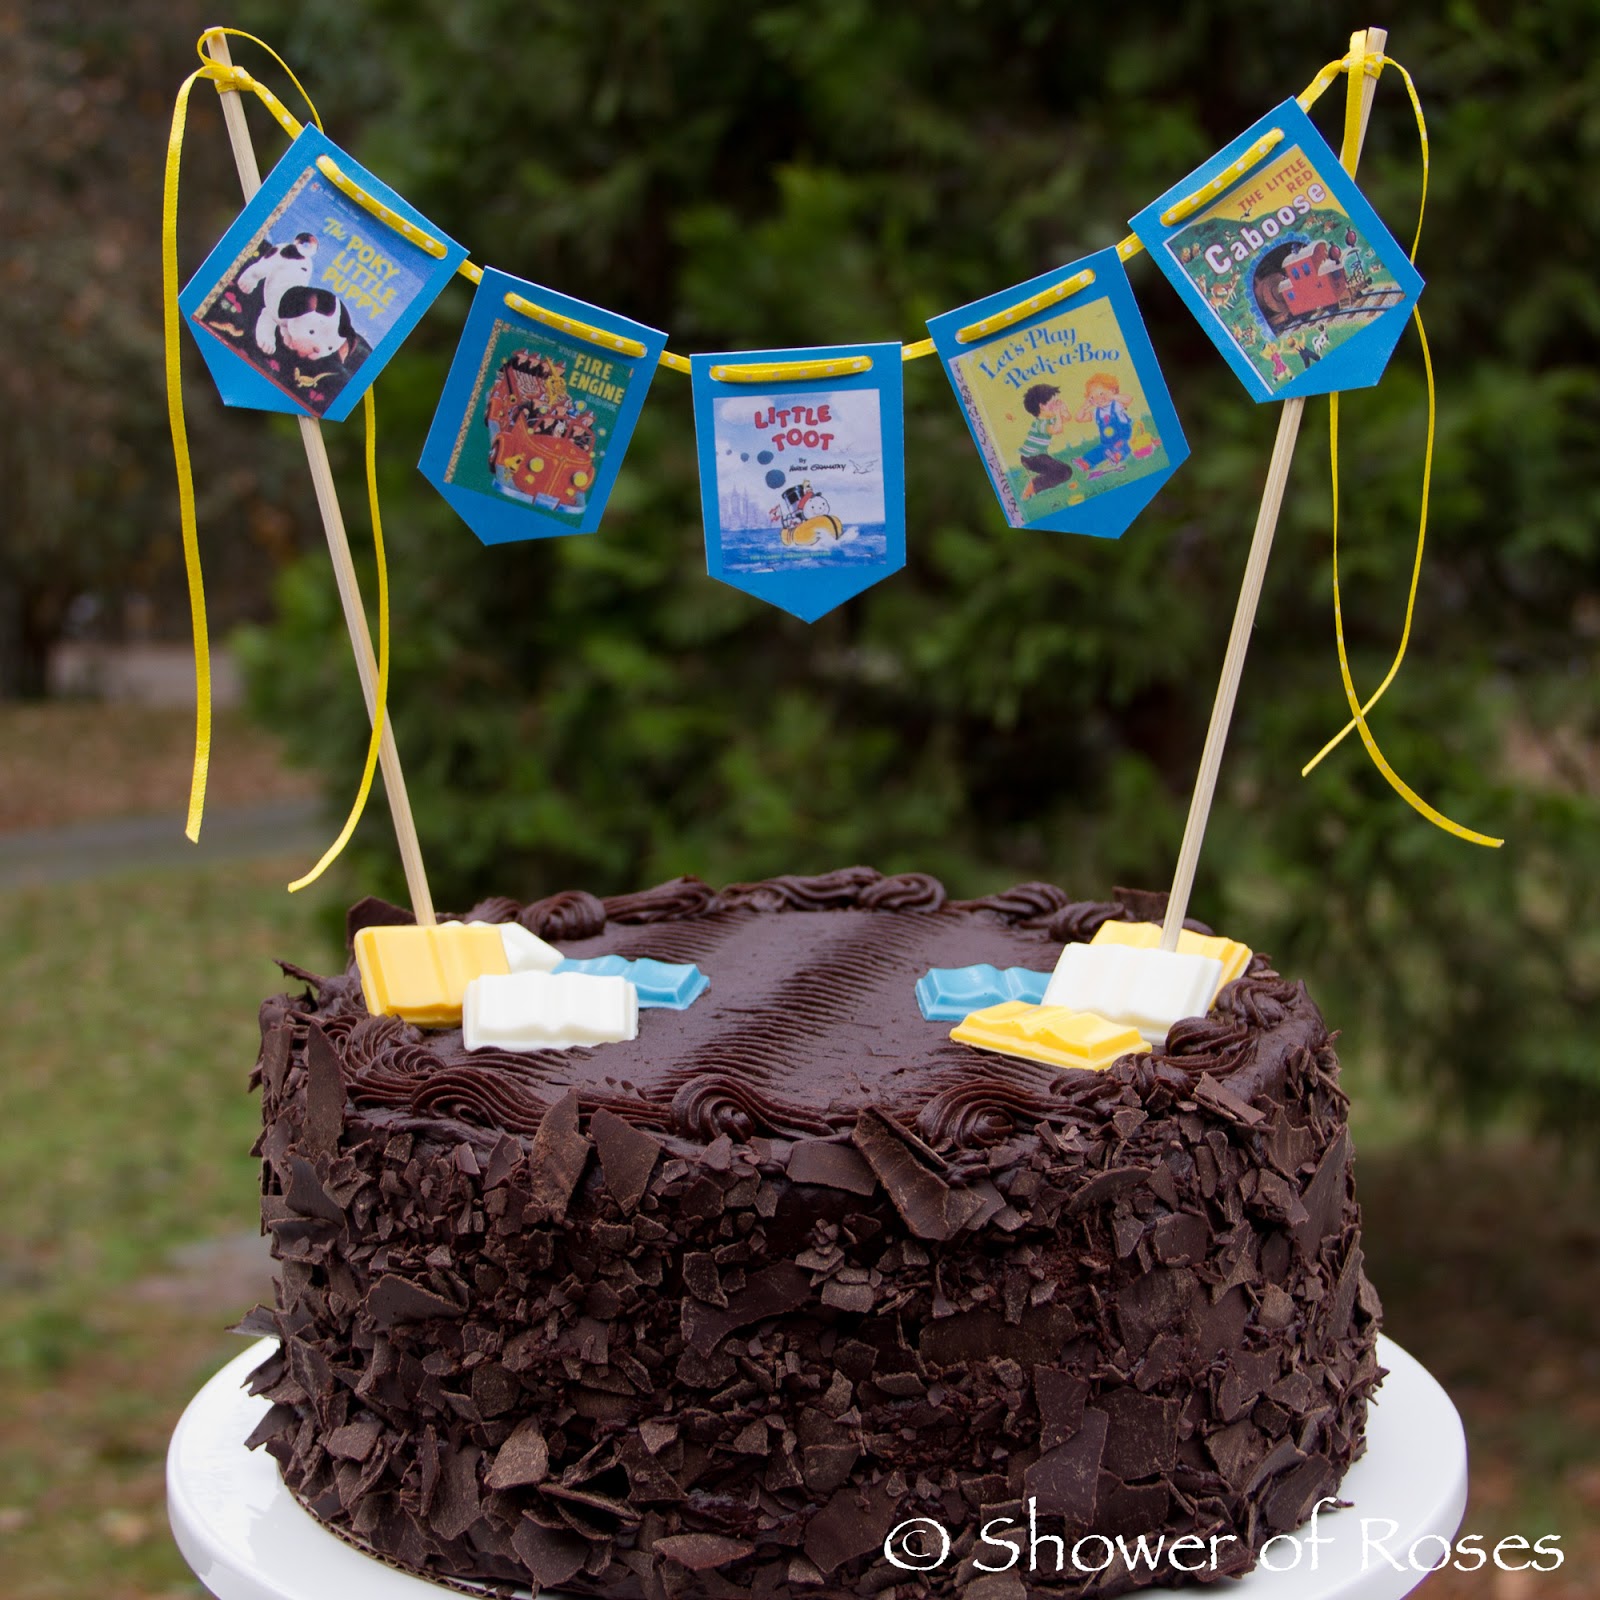 27 Baby Shower Cake Ideas for Boys and Girls | Pampers